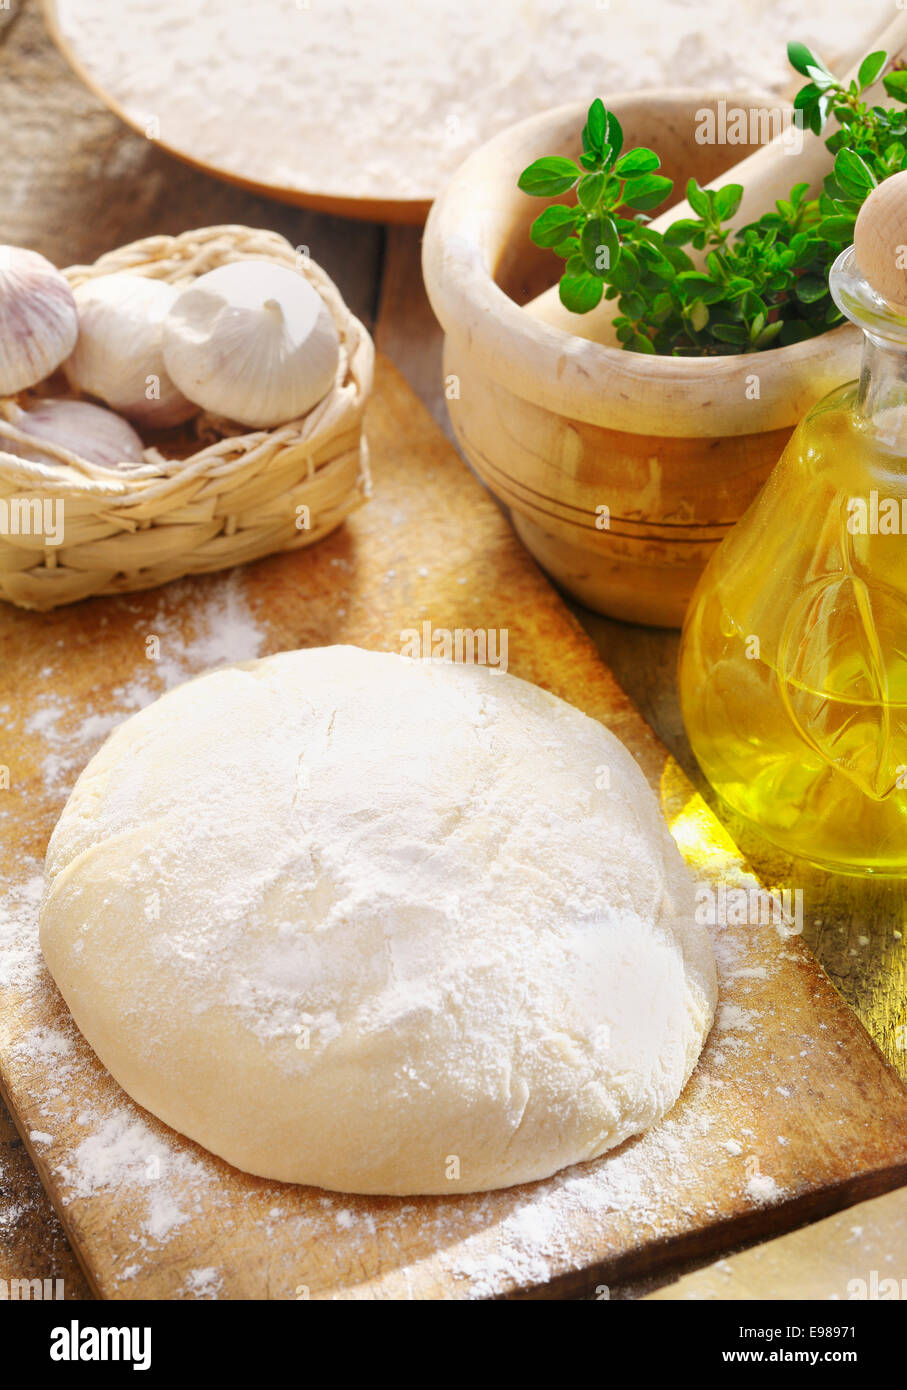 Dough and ingredients for preparing a delicious homemade Italian pizza Stock Photo